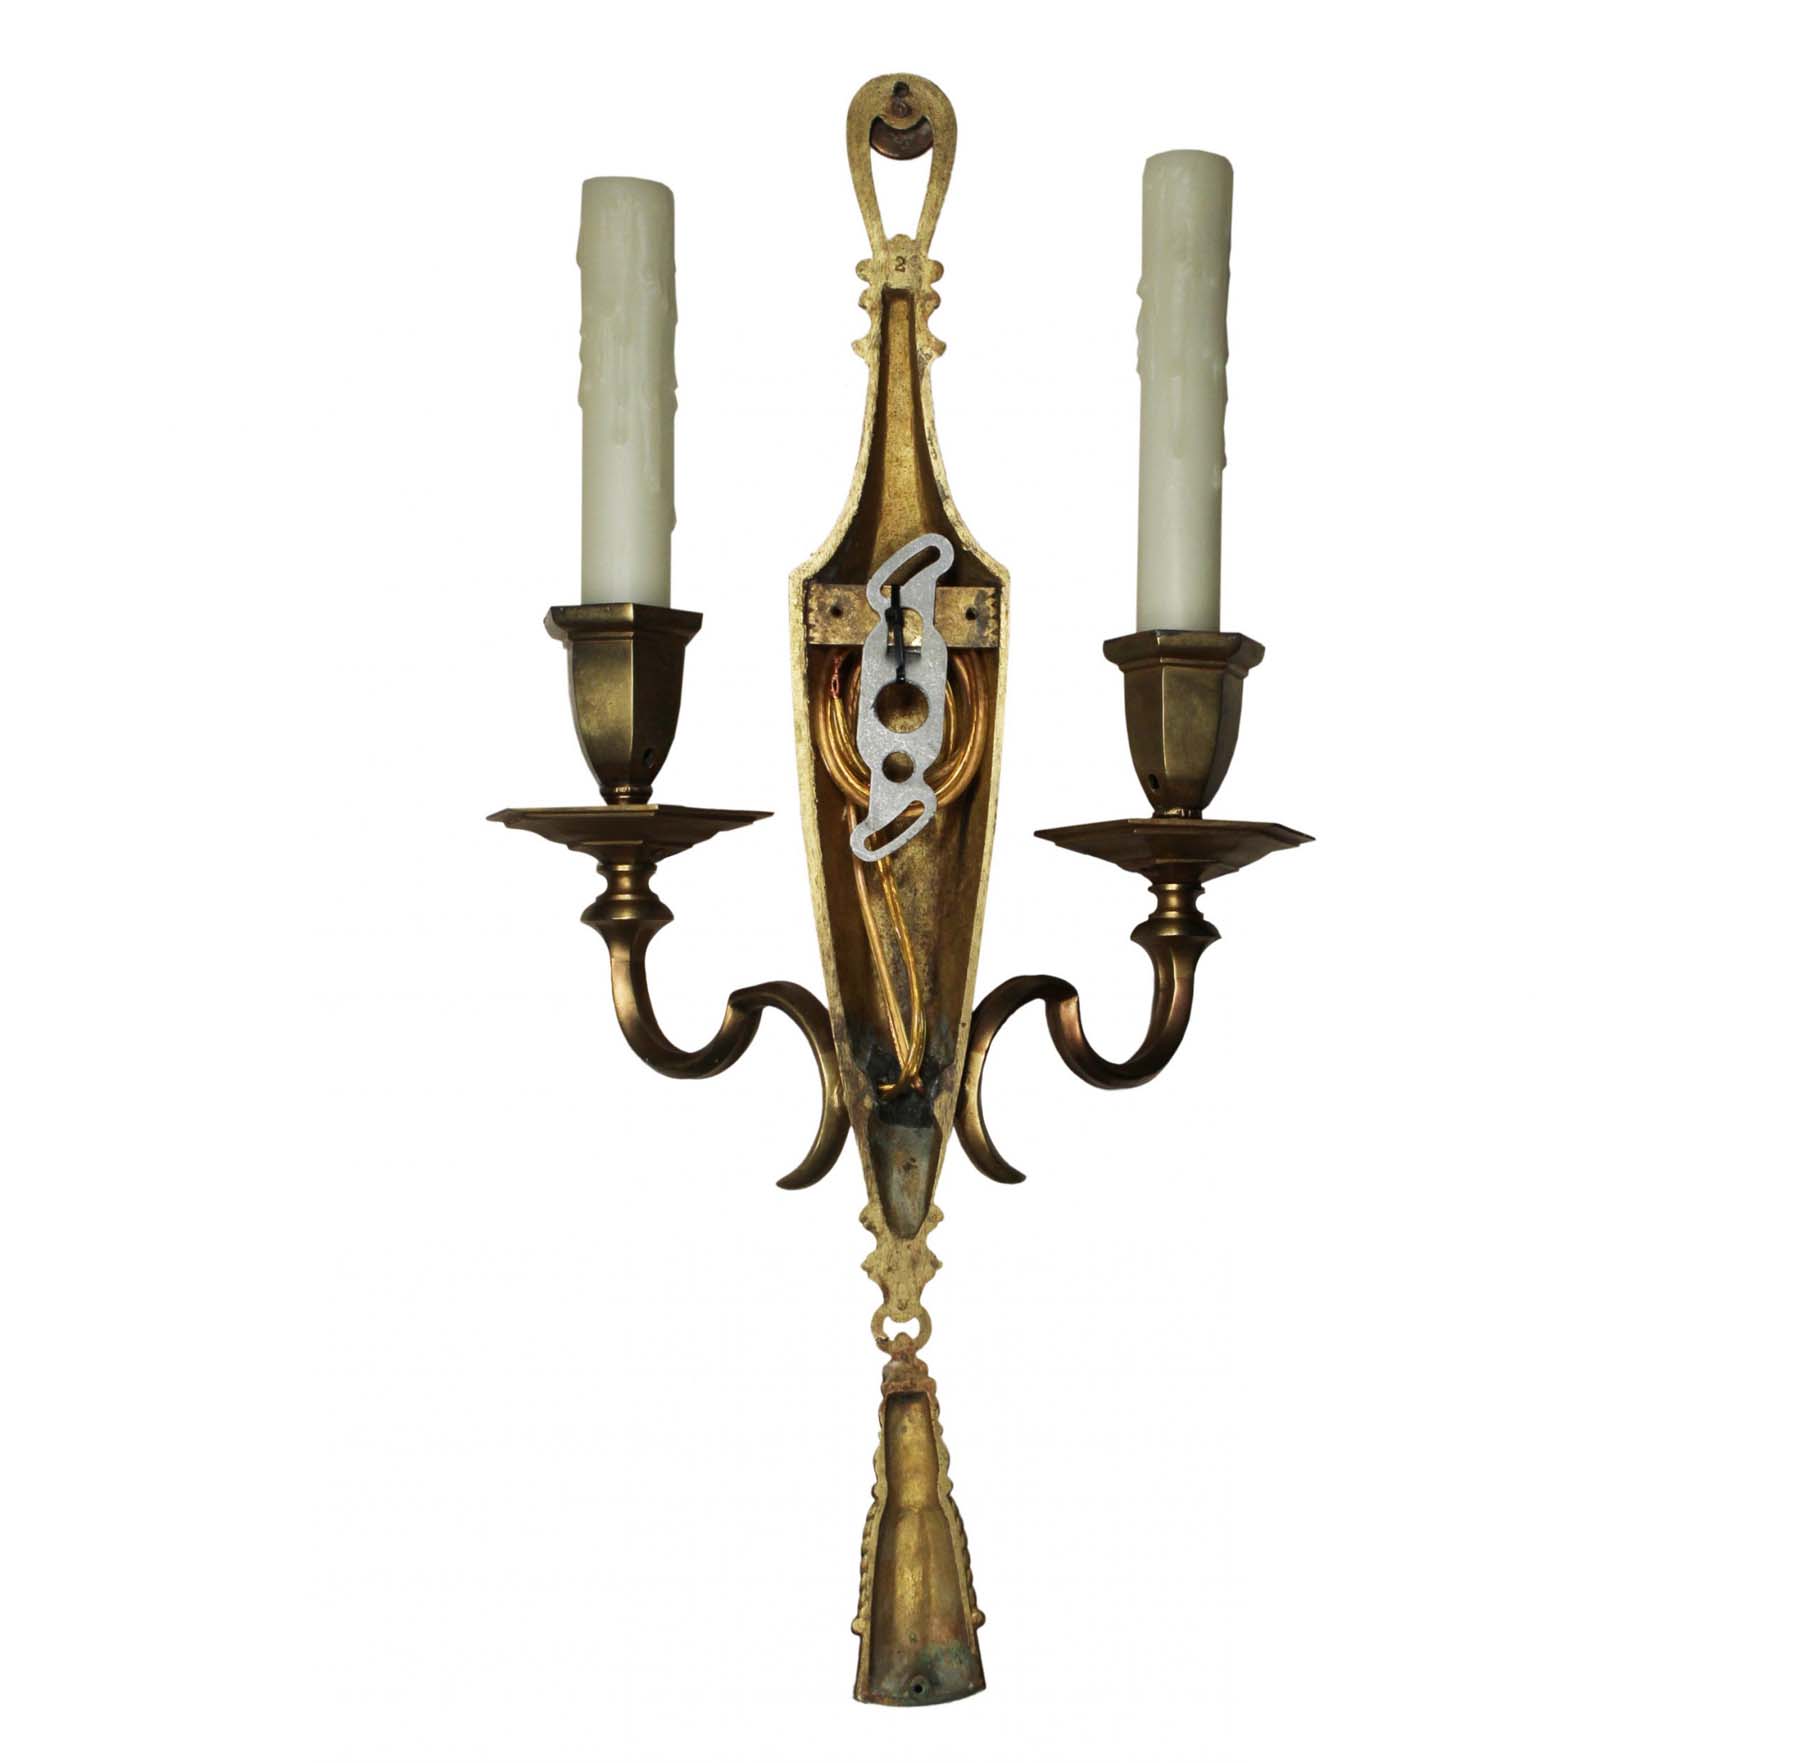 Exceptional Pairs of Antique Double-Arm Sconces, Signed E. F. Caldwell-68342